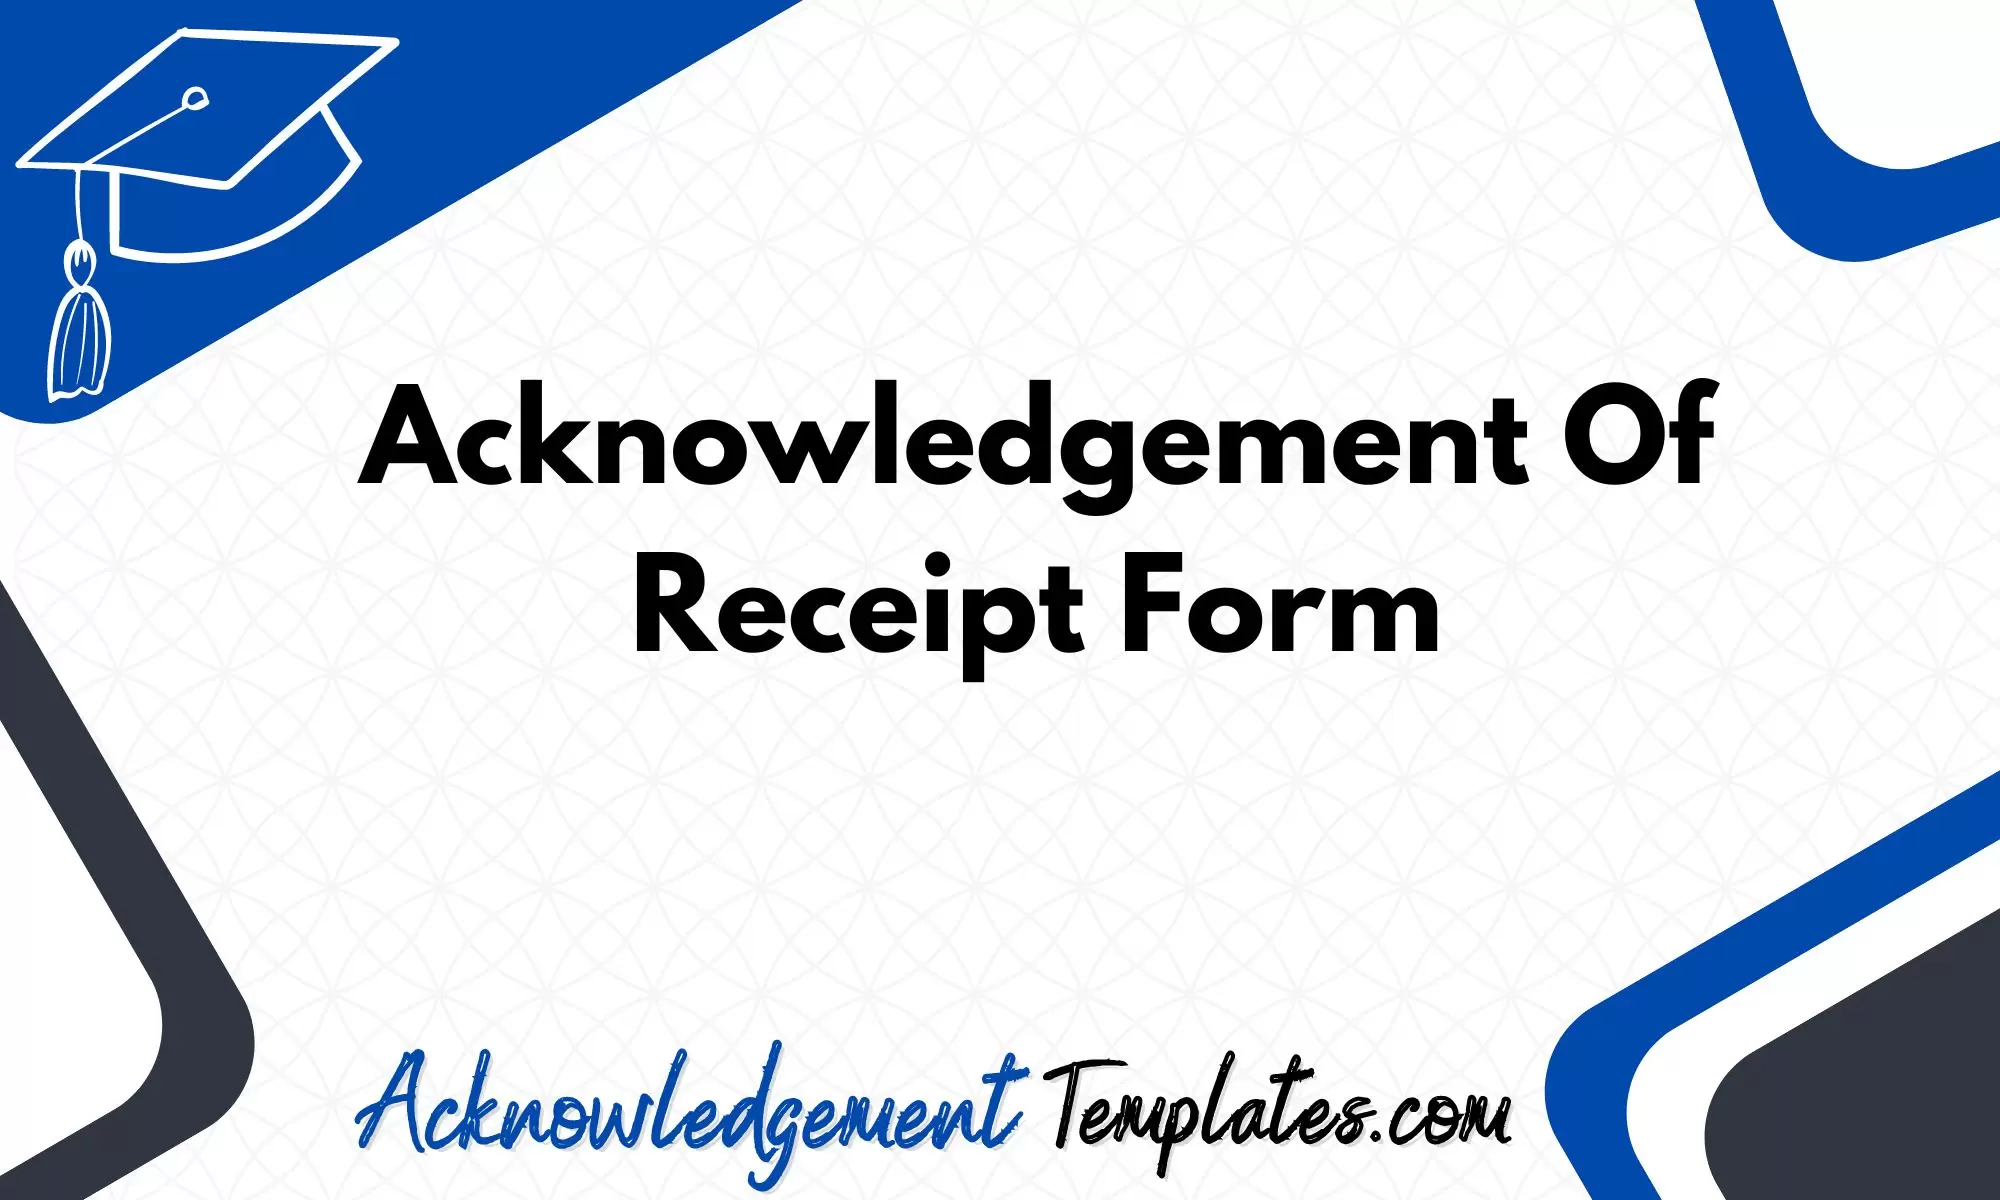 Acknowledgement Of Receipt Form